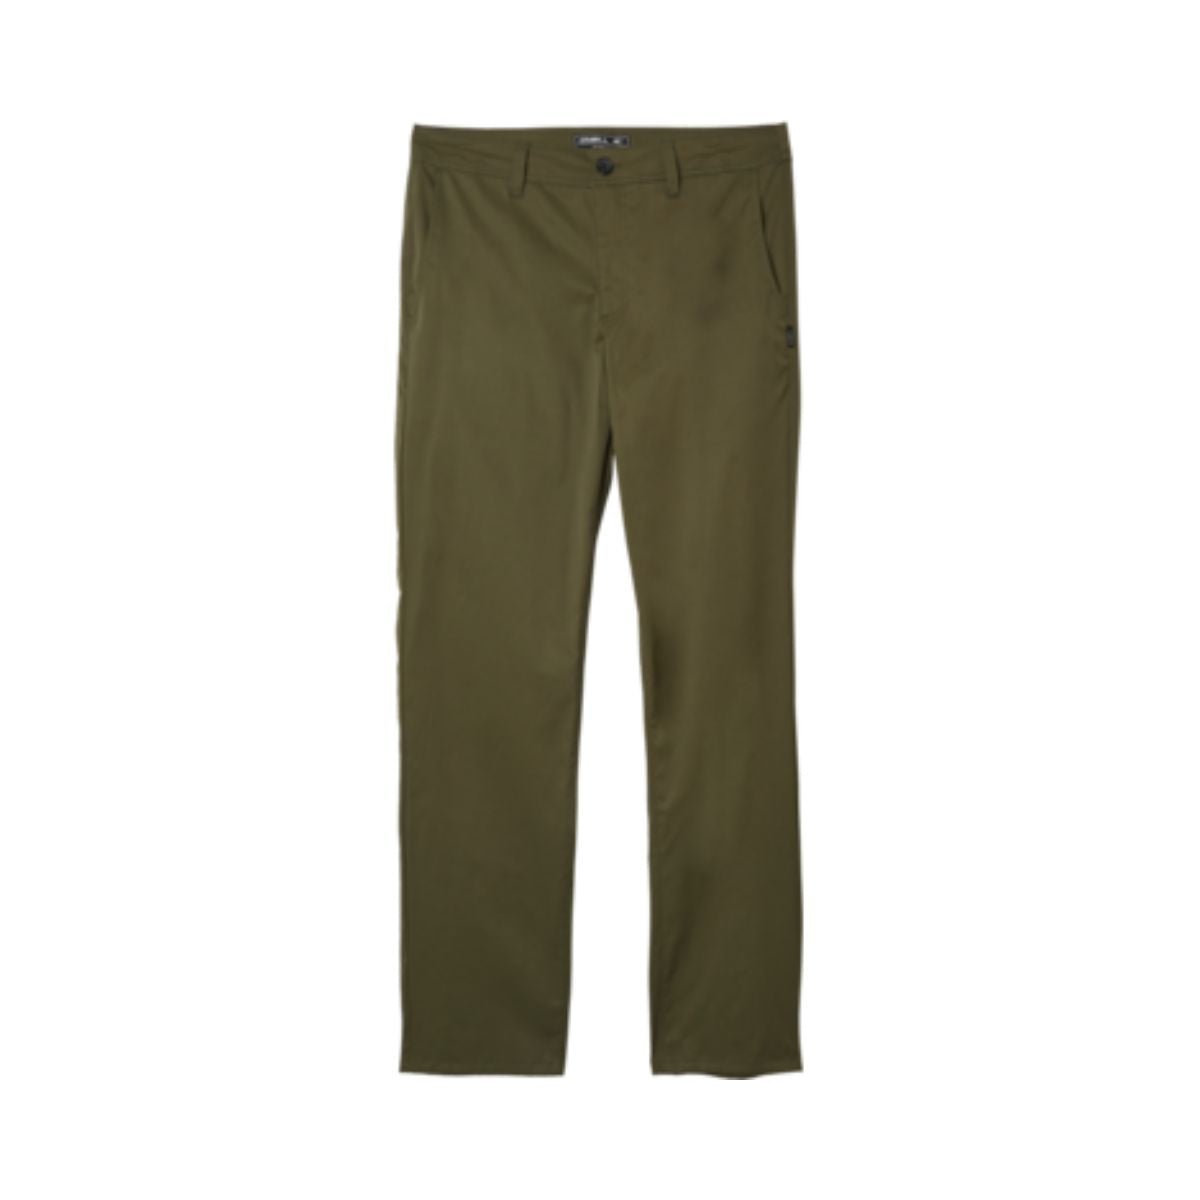 O'Neill Mission Hybrid Chino Pants in Army - BoardCo